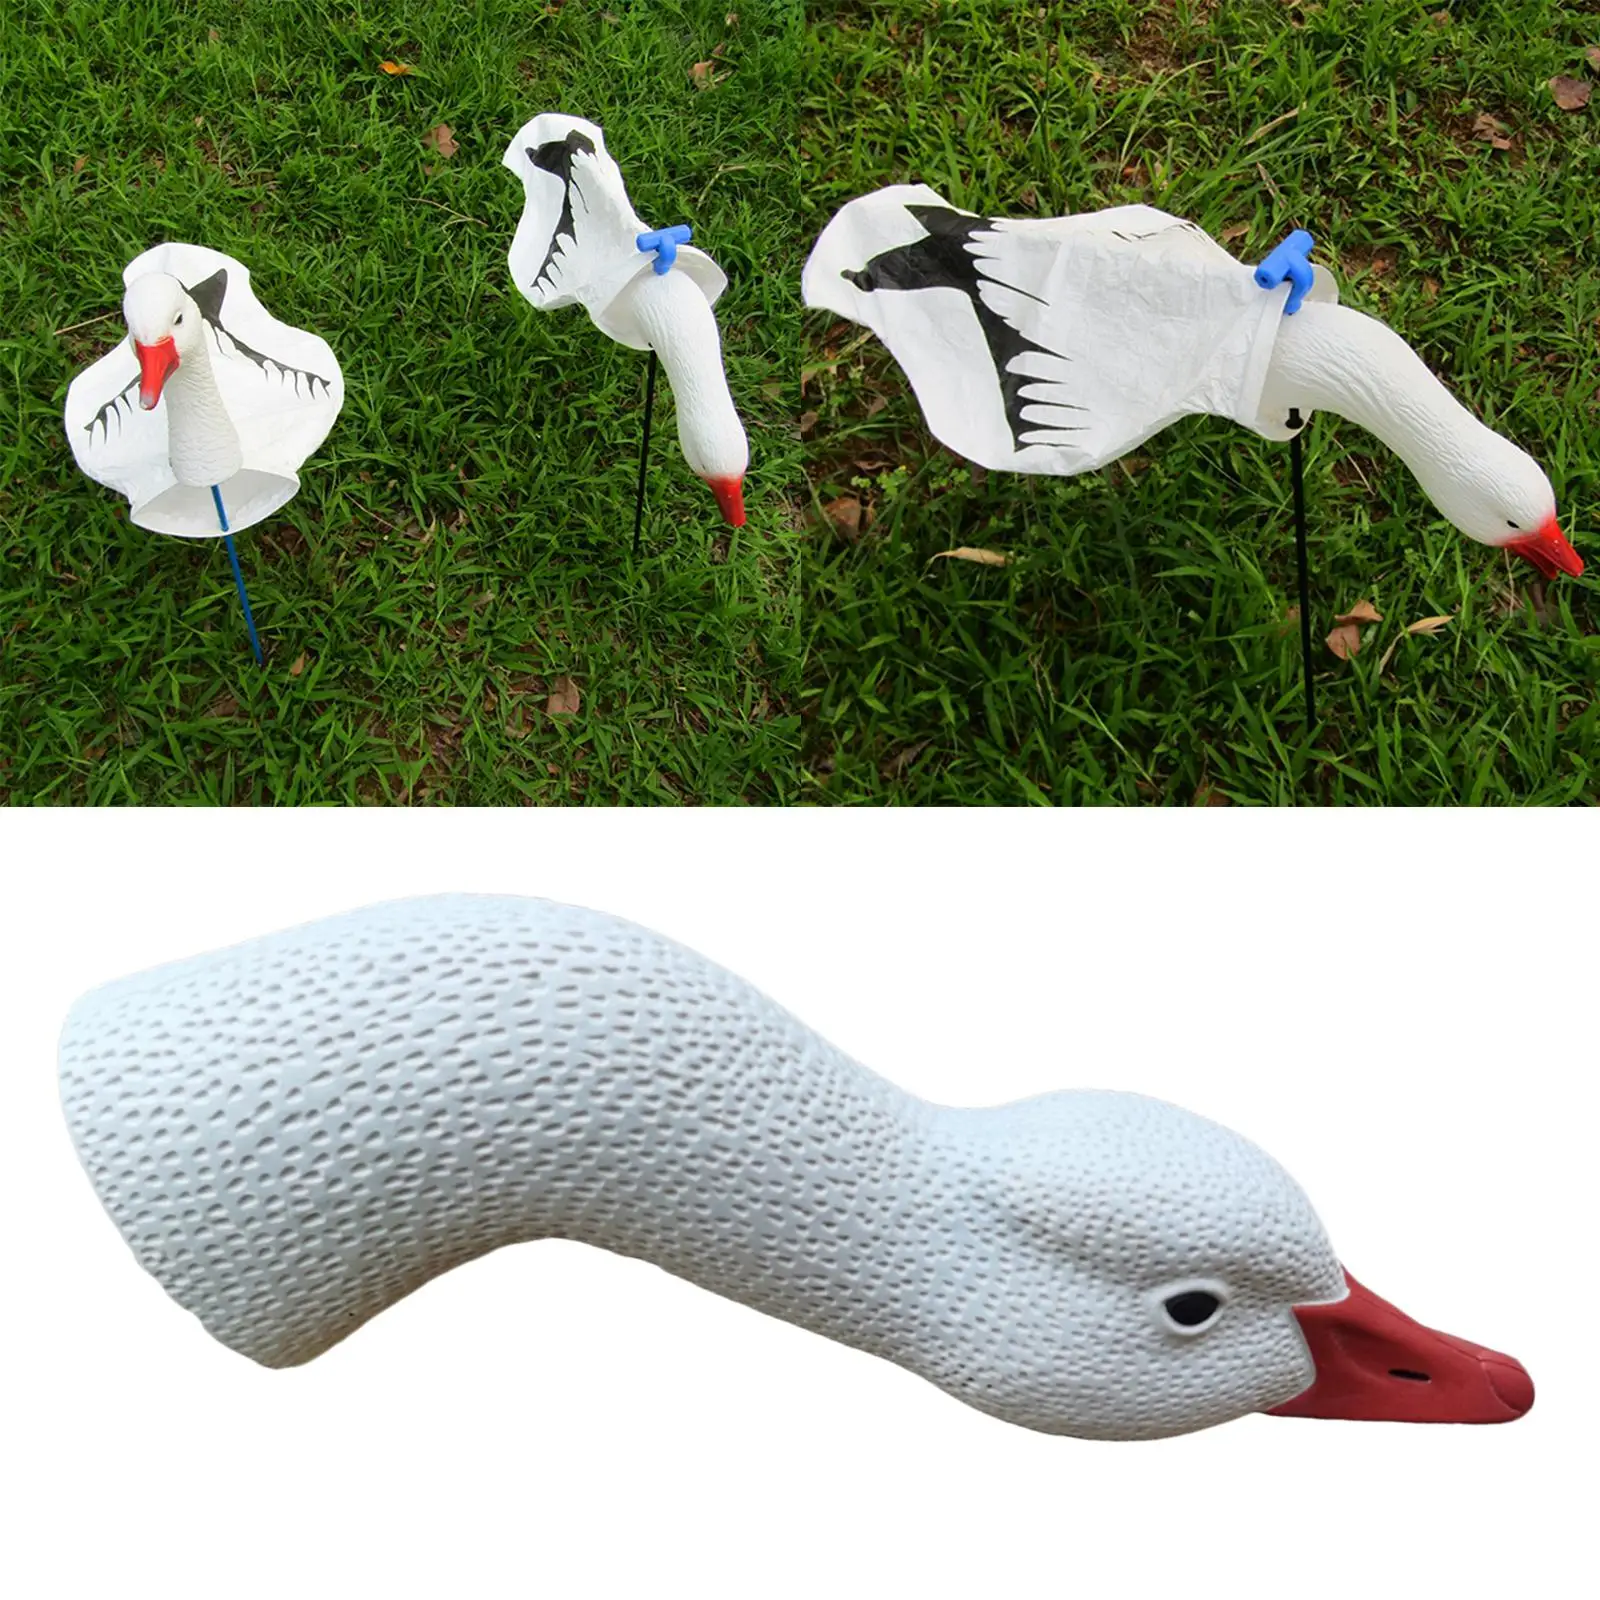 1pc Realistic Outdoors Hunting Gear White Goose Head Decoys Gardening Decor